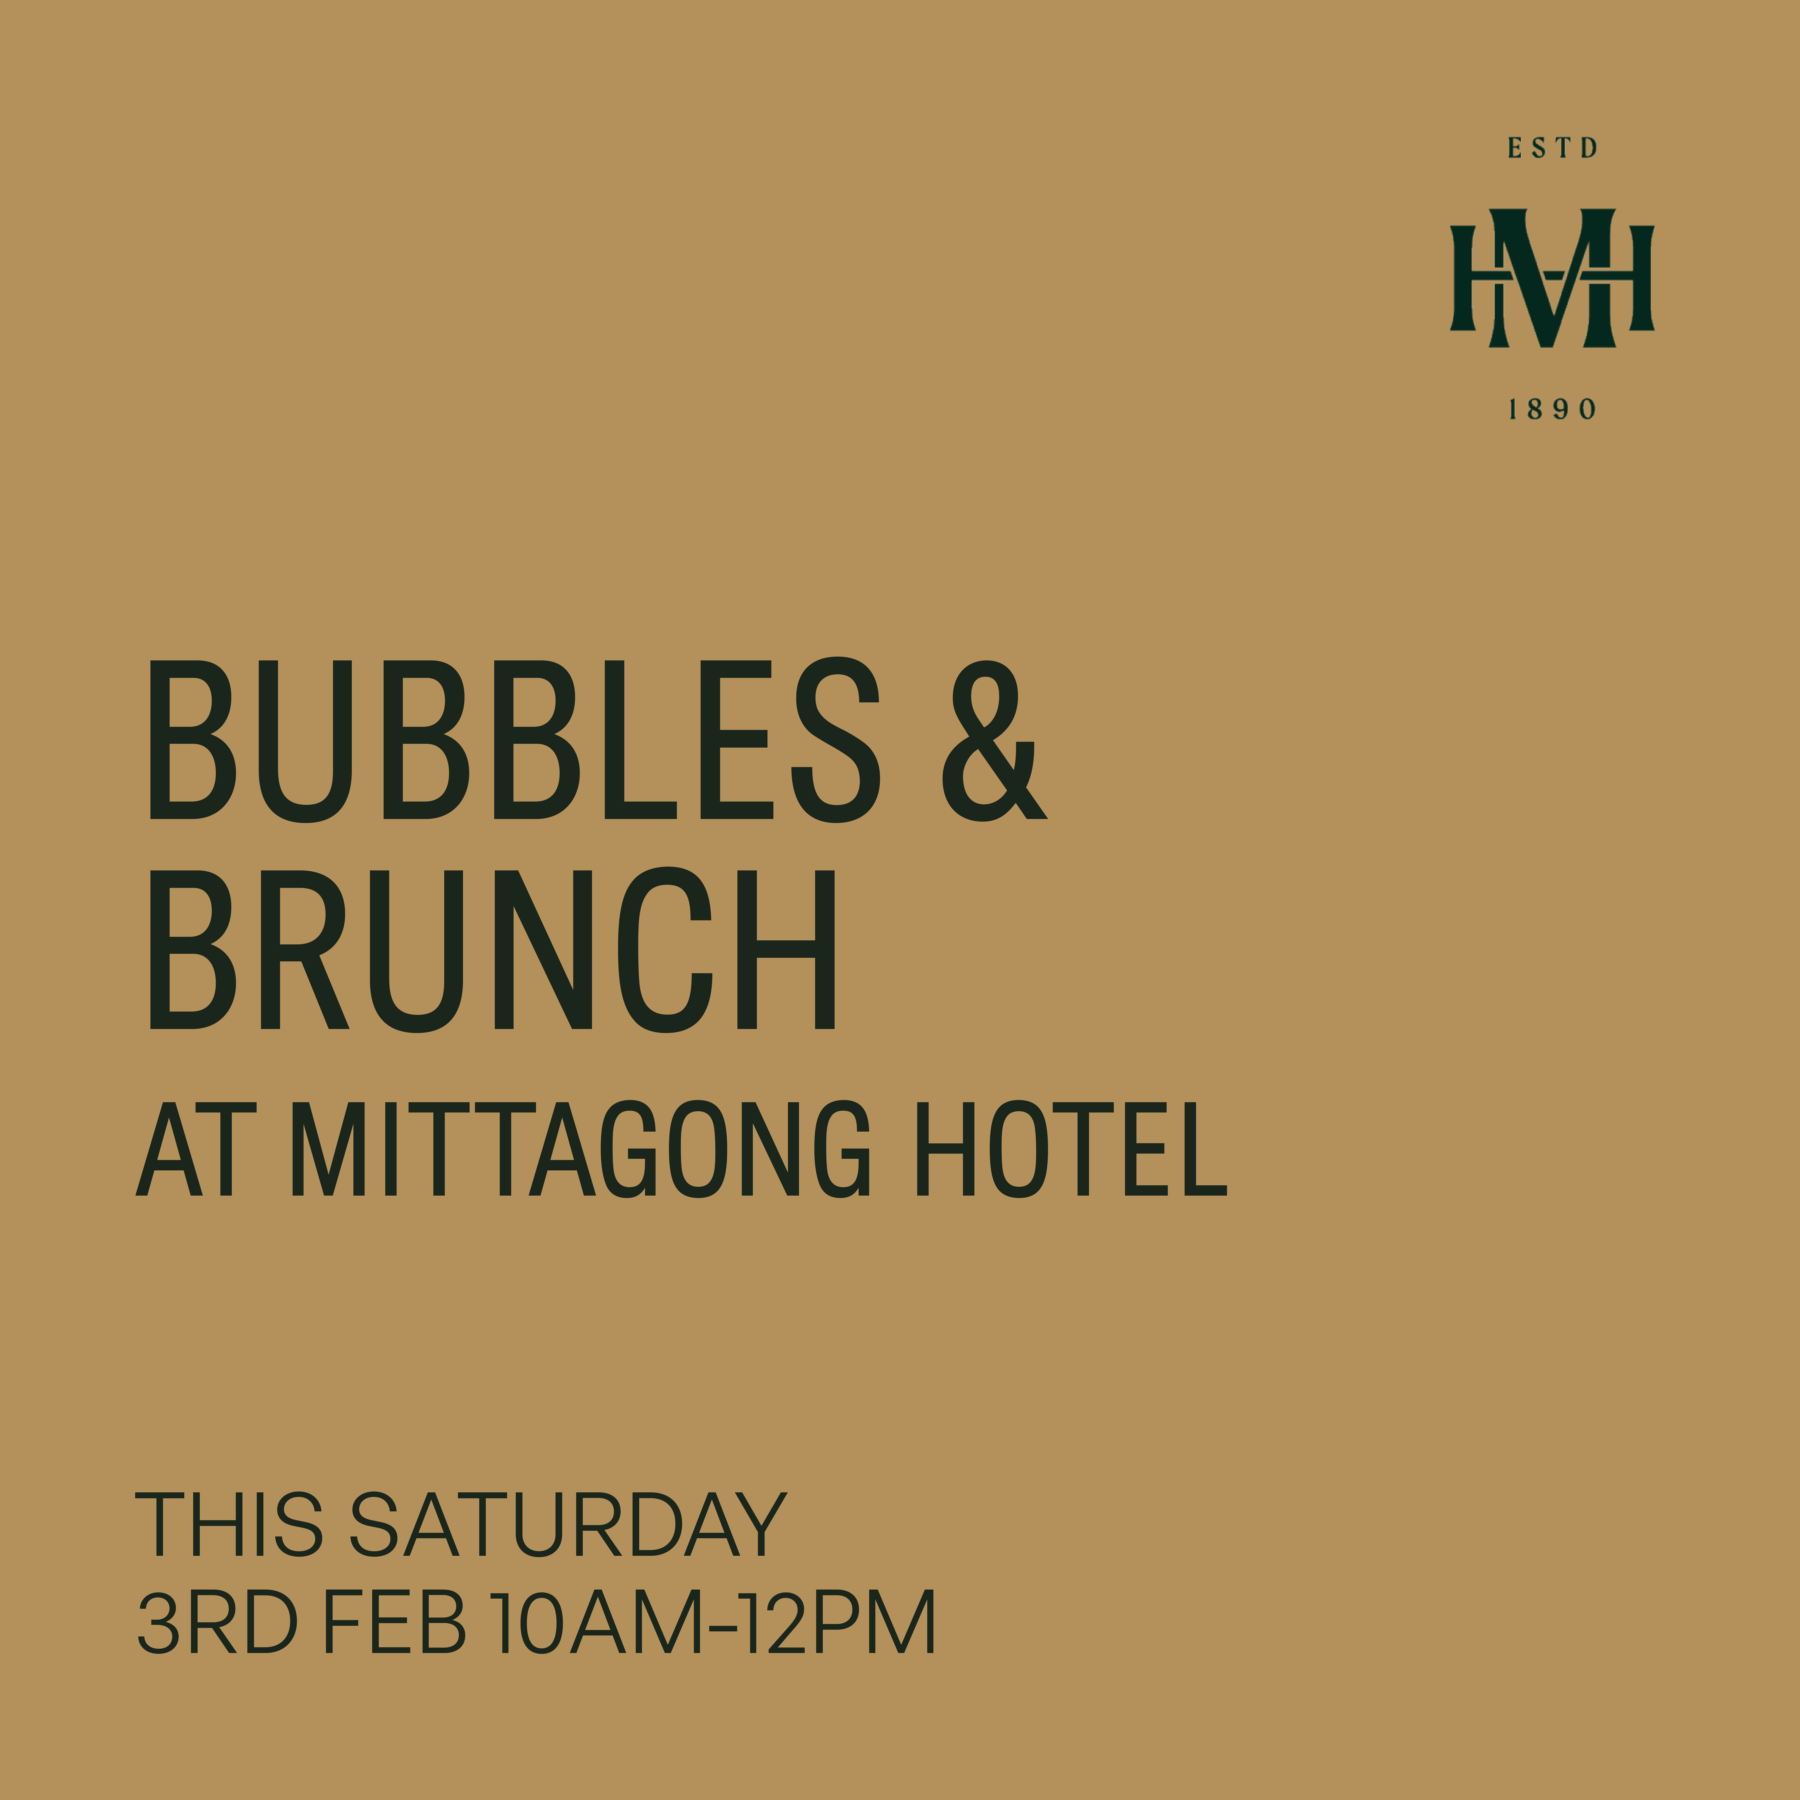 Bubbles & Brunch. Mittagong Hotel. Saturday 3rd February 10am-12pm.